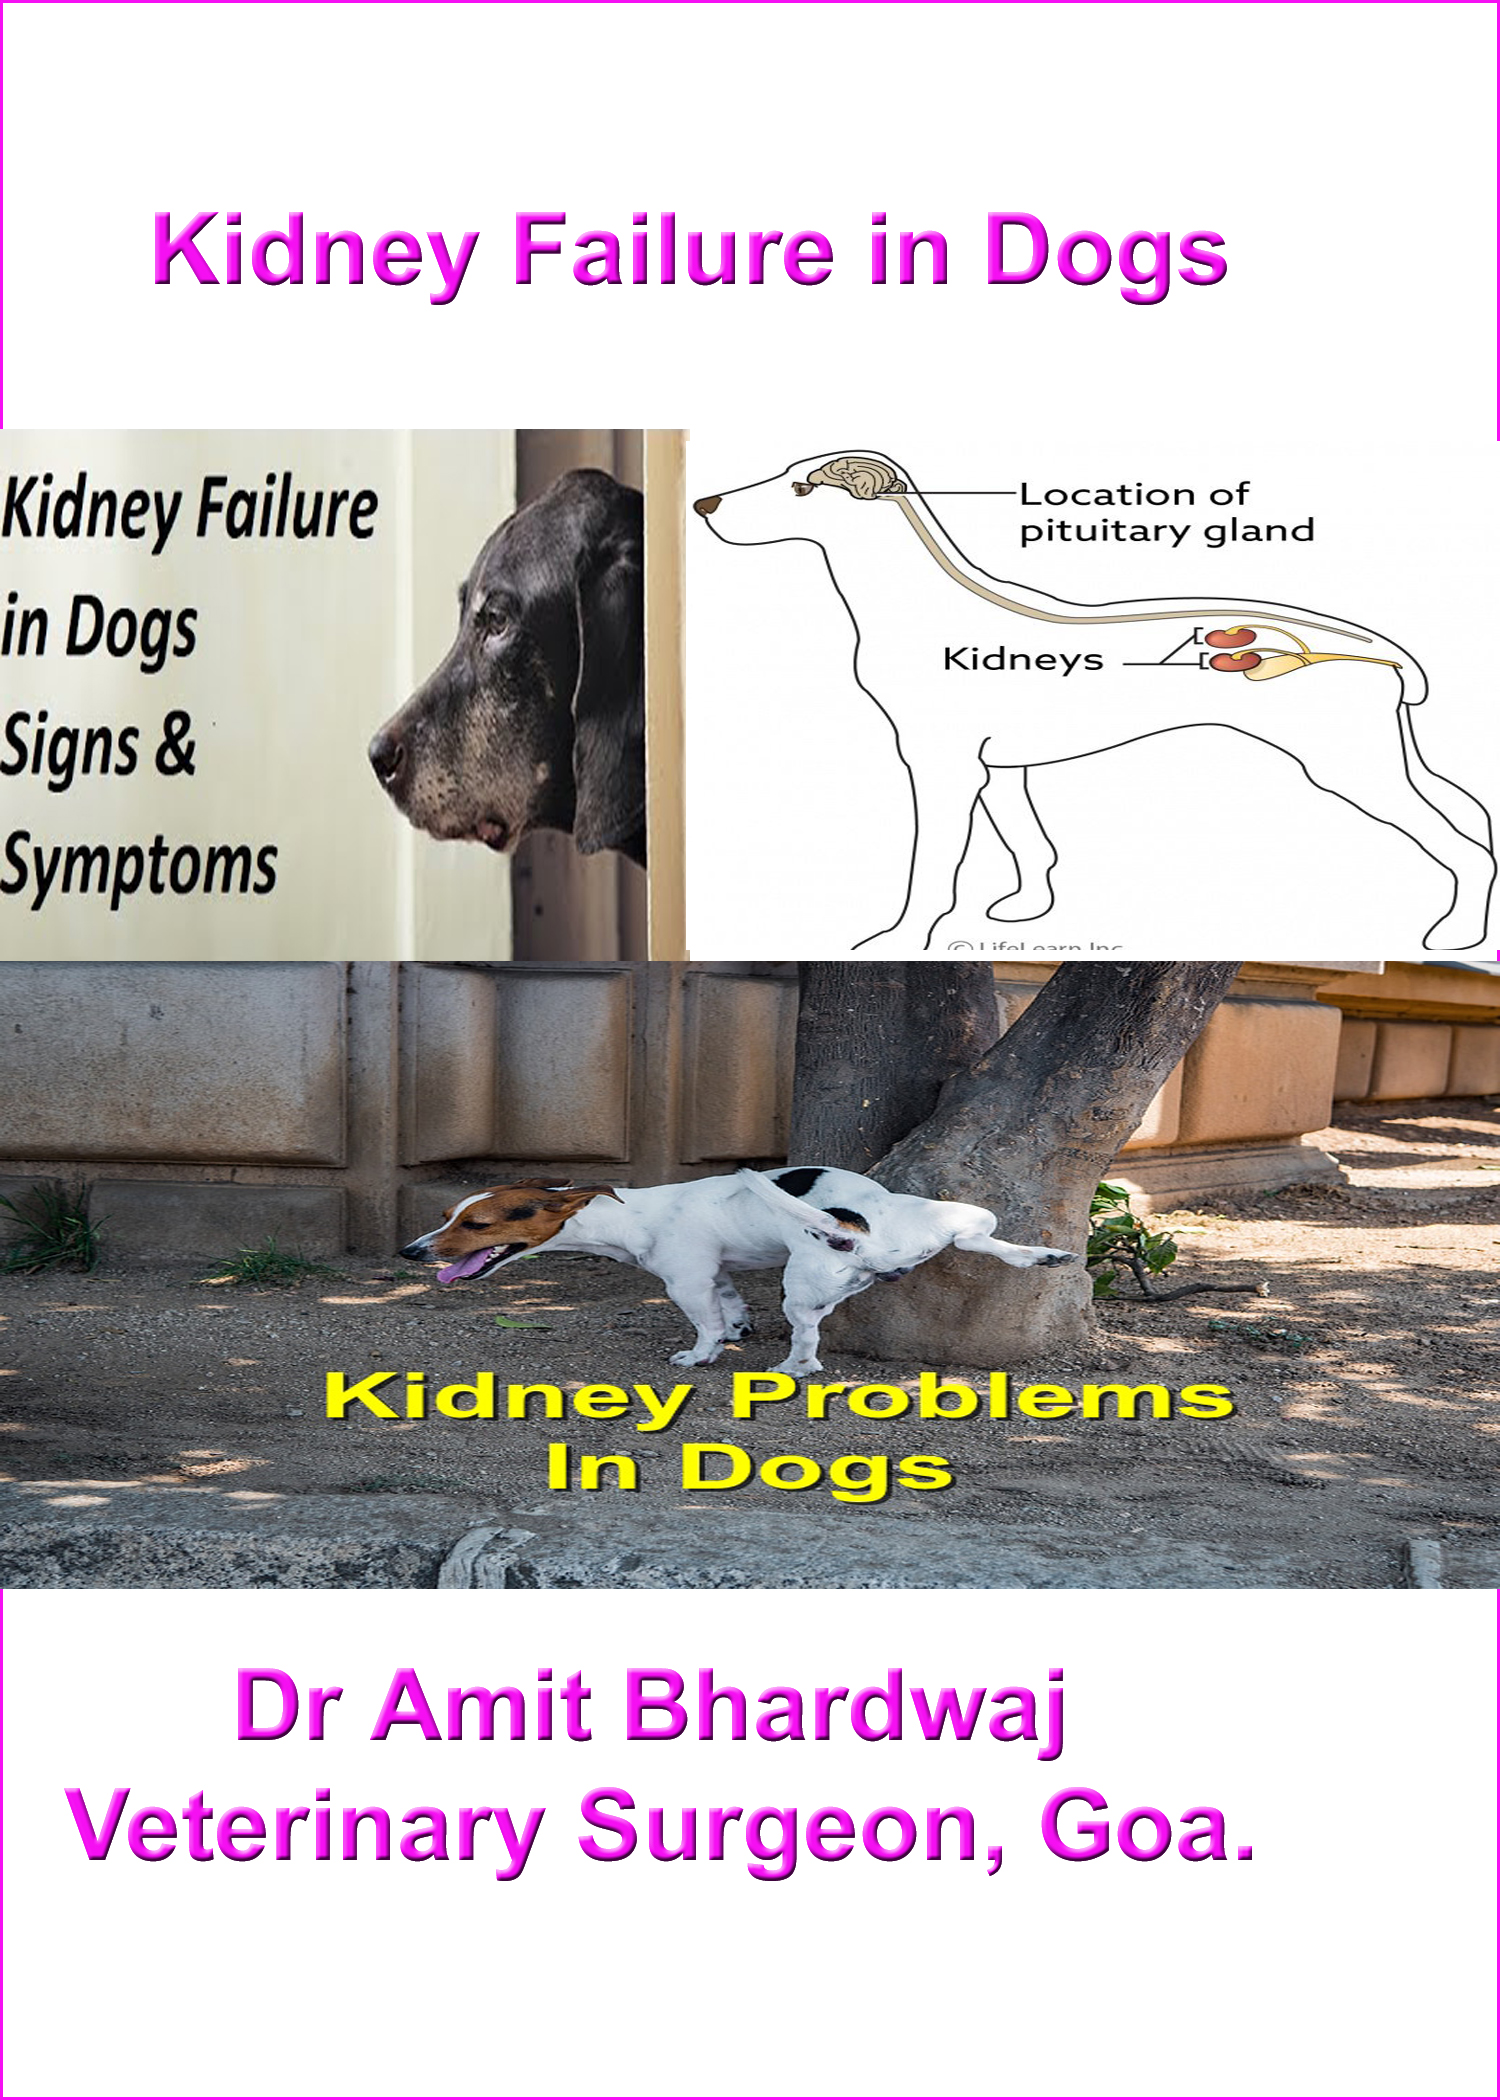 what are the stages of kidney failure in dogs